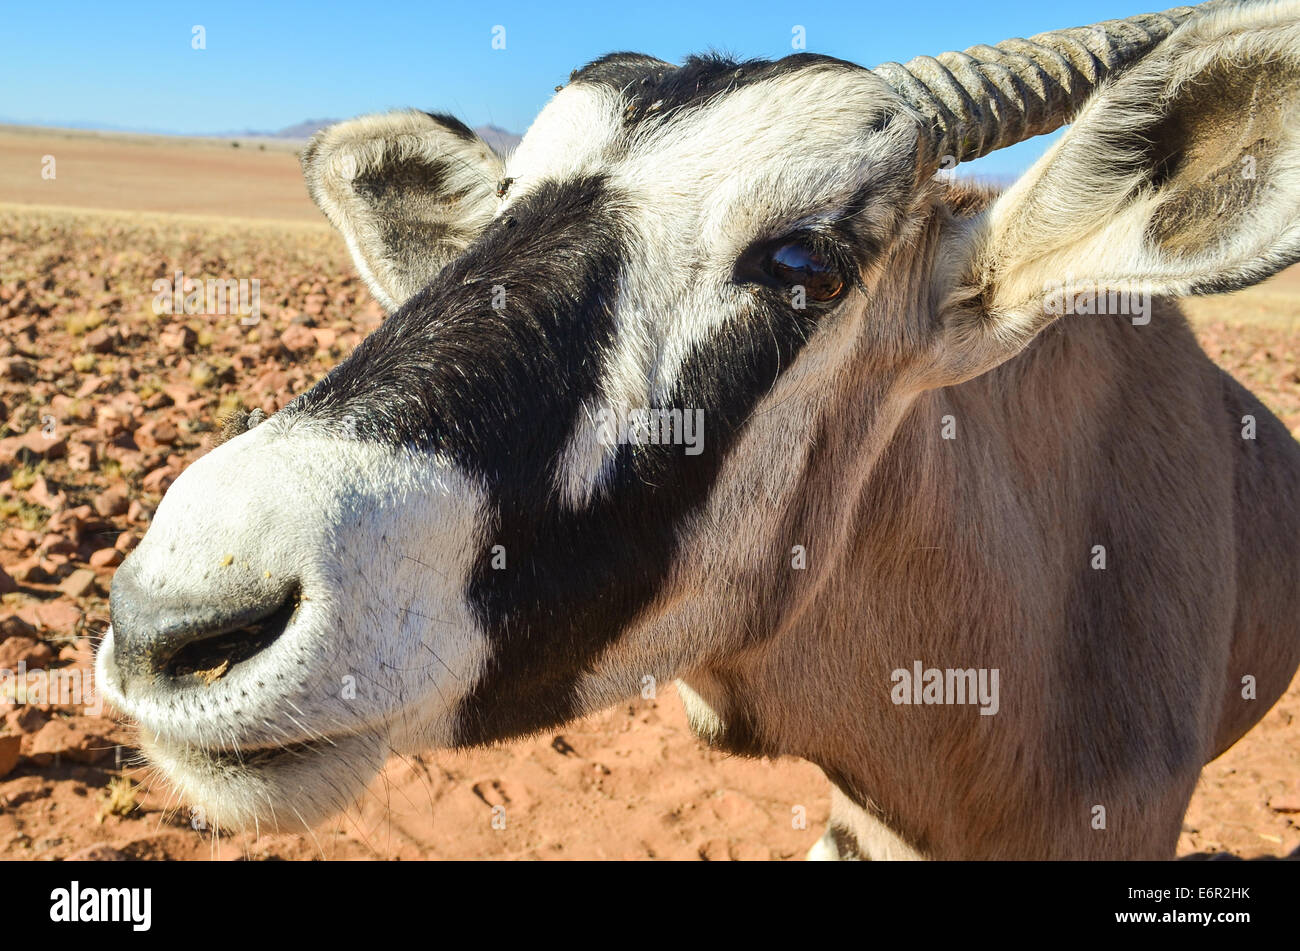 Close-up on the face of an oryx (gemsbok) Stock Photo